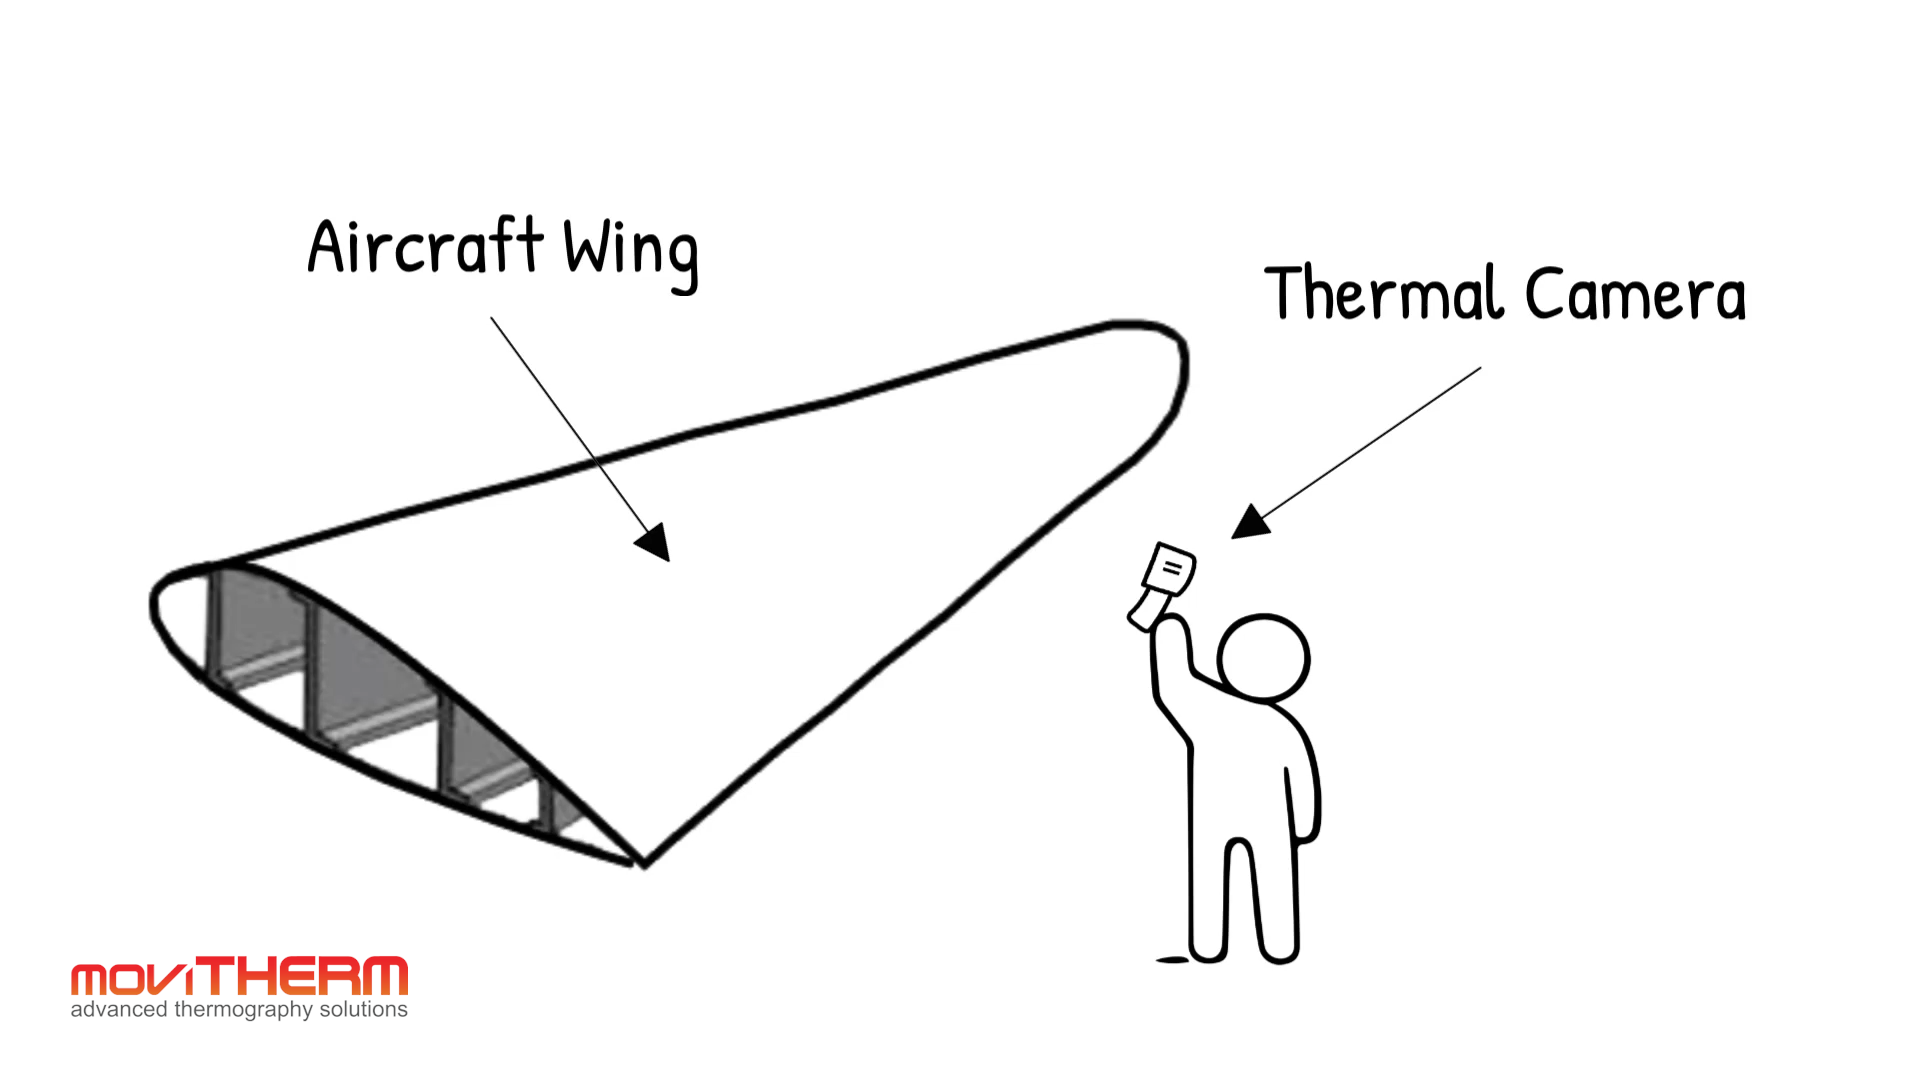 Inspecting the wing of an aircraft with a thermal camera